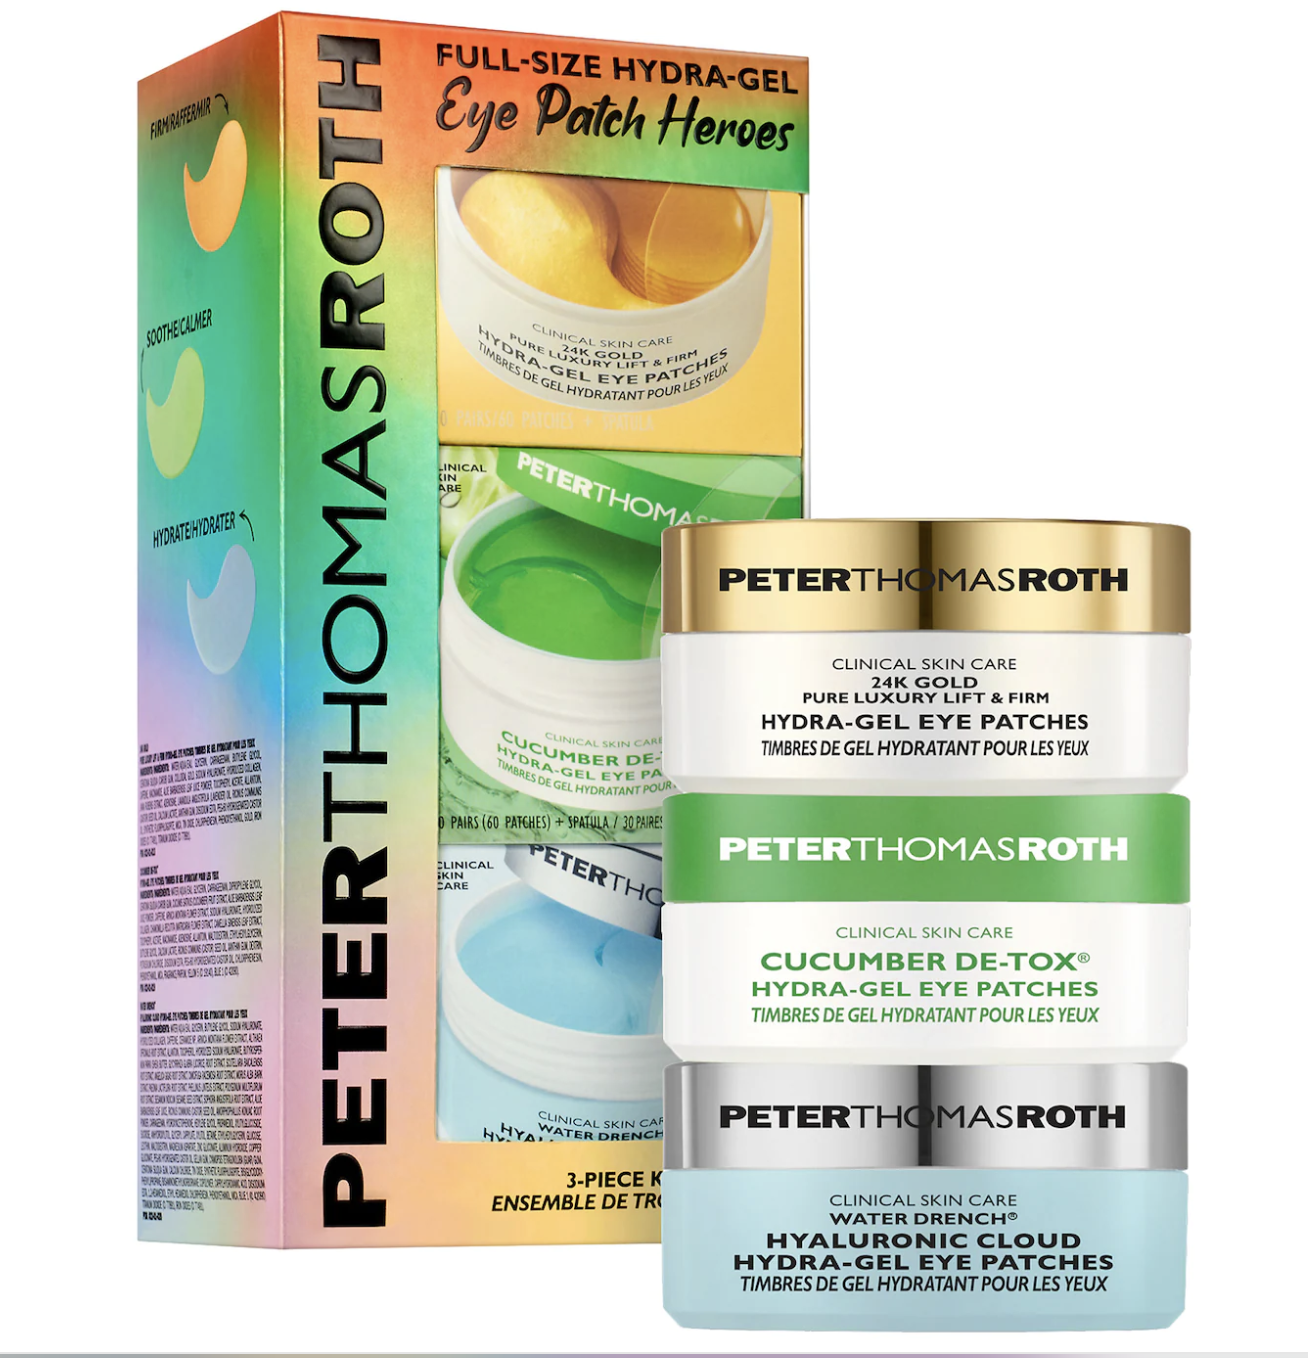 Peter Thomas Roth Full-Size Hydra-Gel Eye Patch Heroes 3-Piece Kit